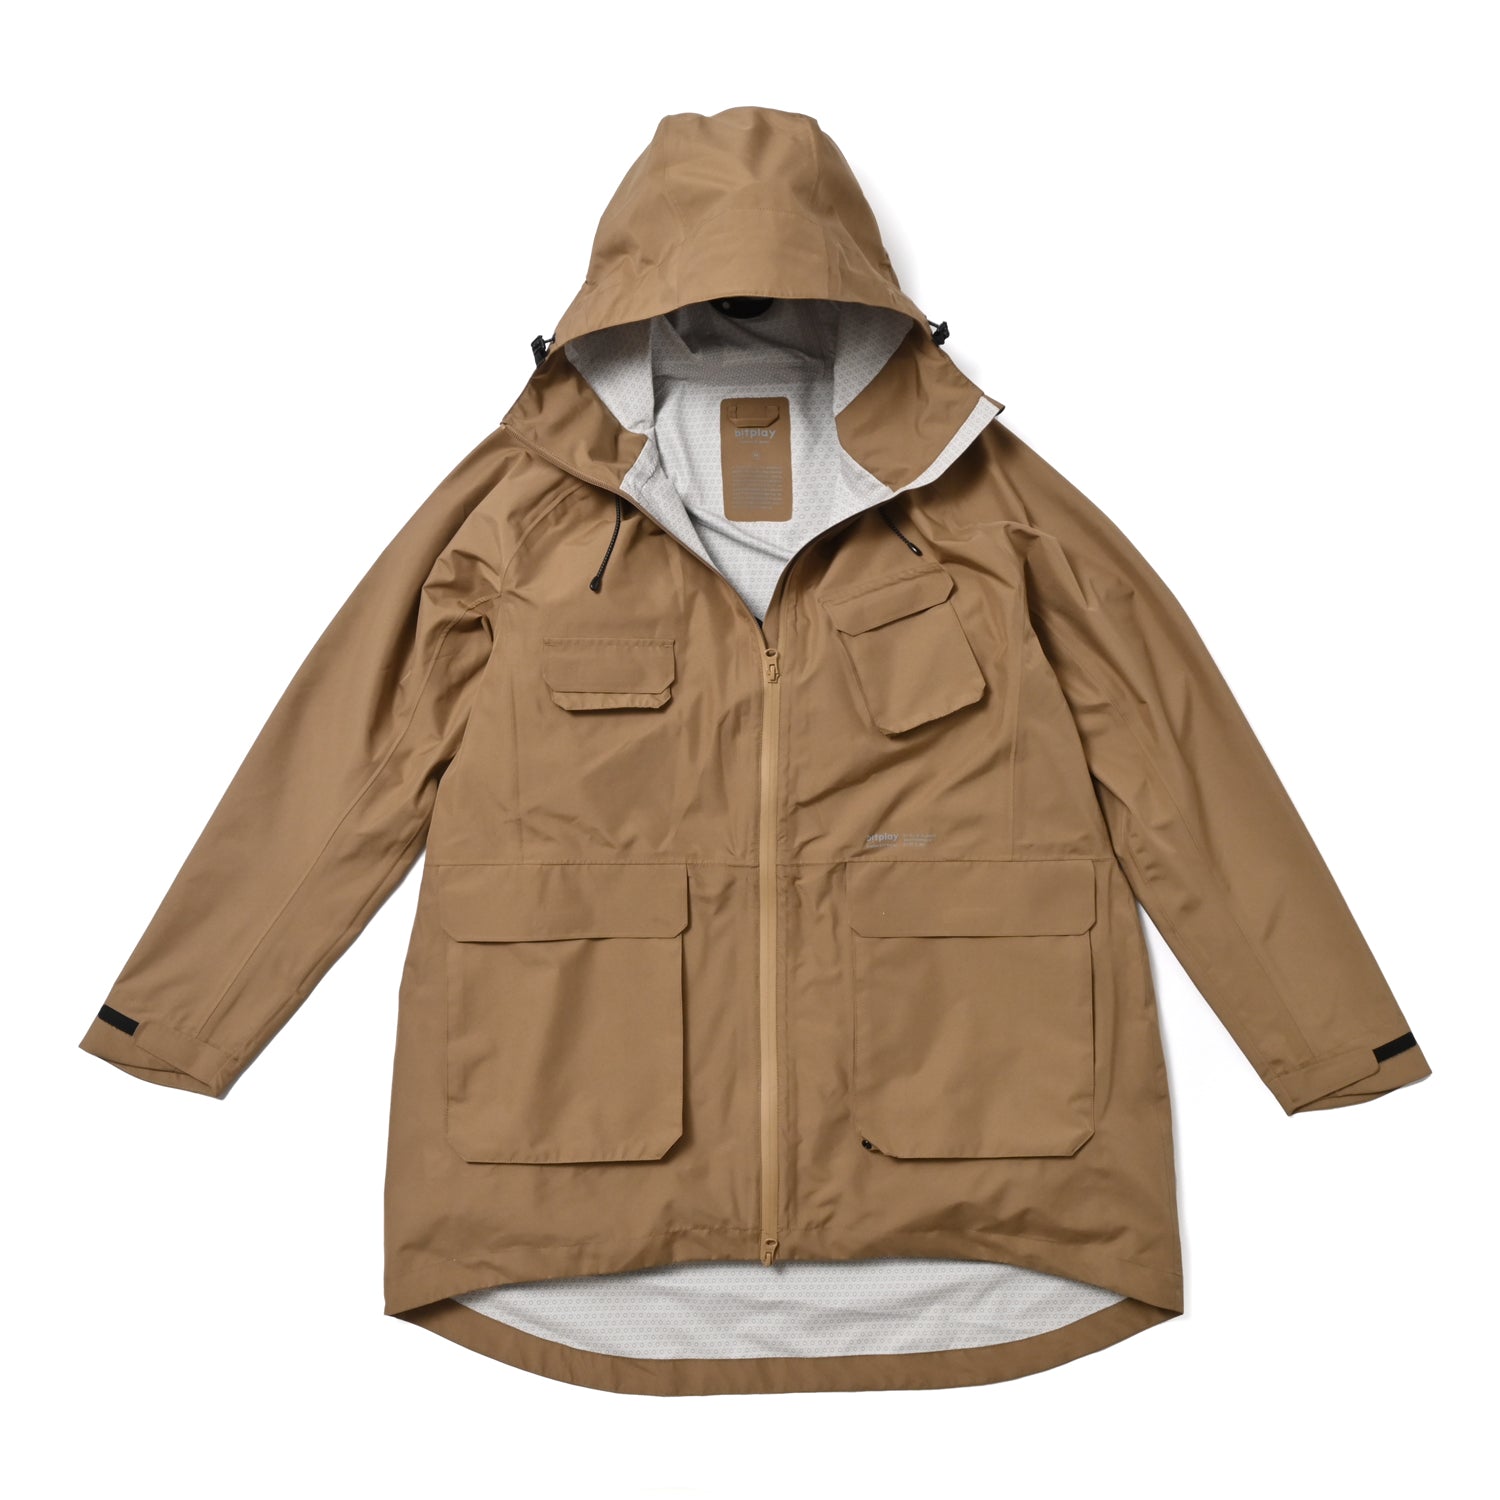 All-Weather Wander Coat - Sand